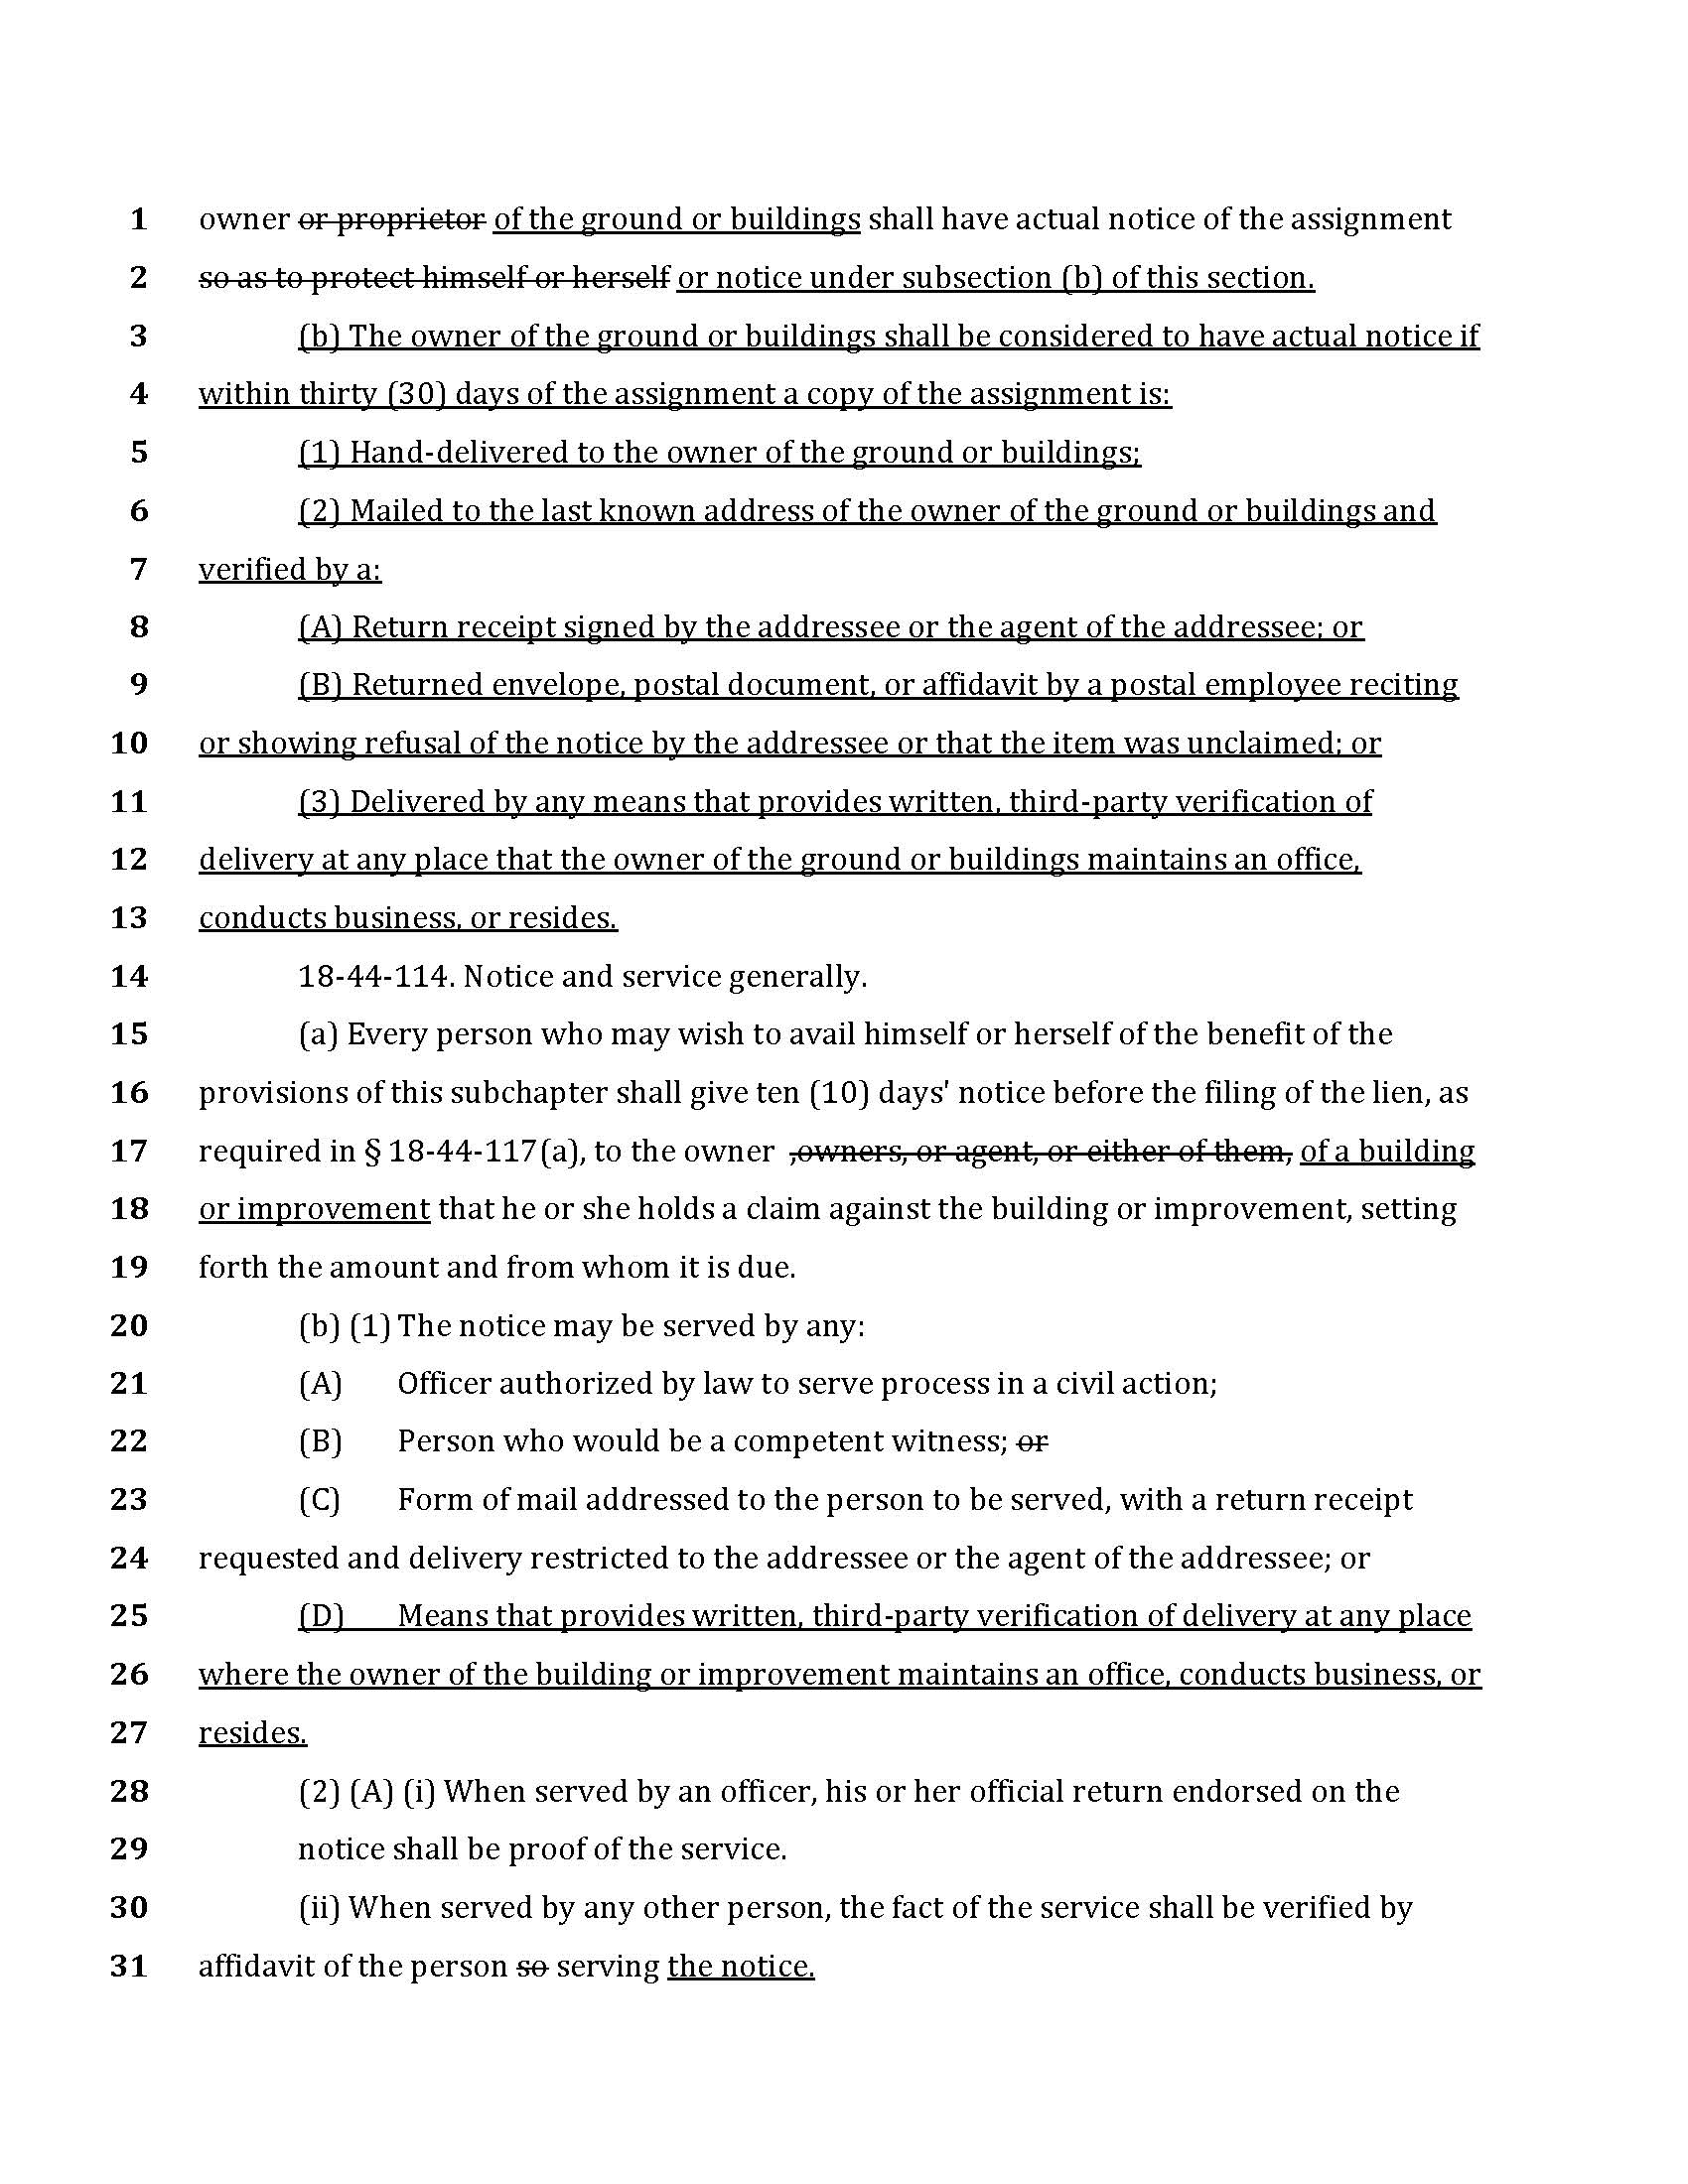 final-bill-lien-law-revisions_Page_04.jpg